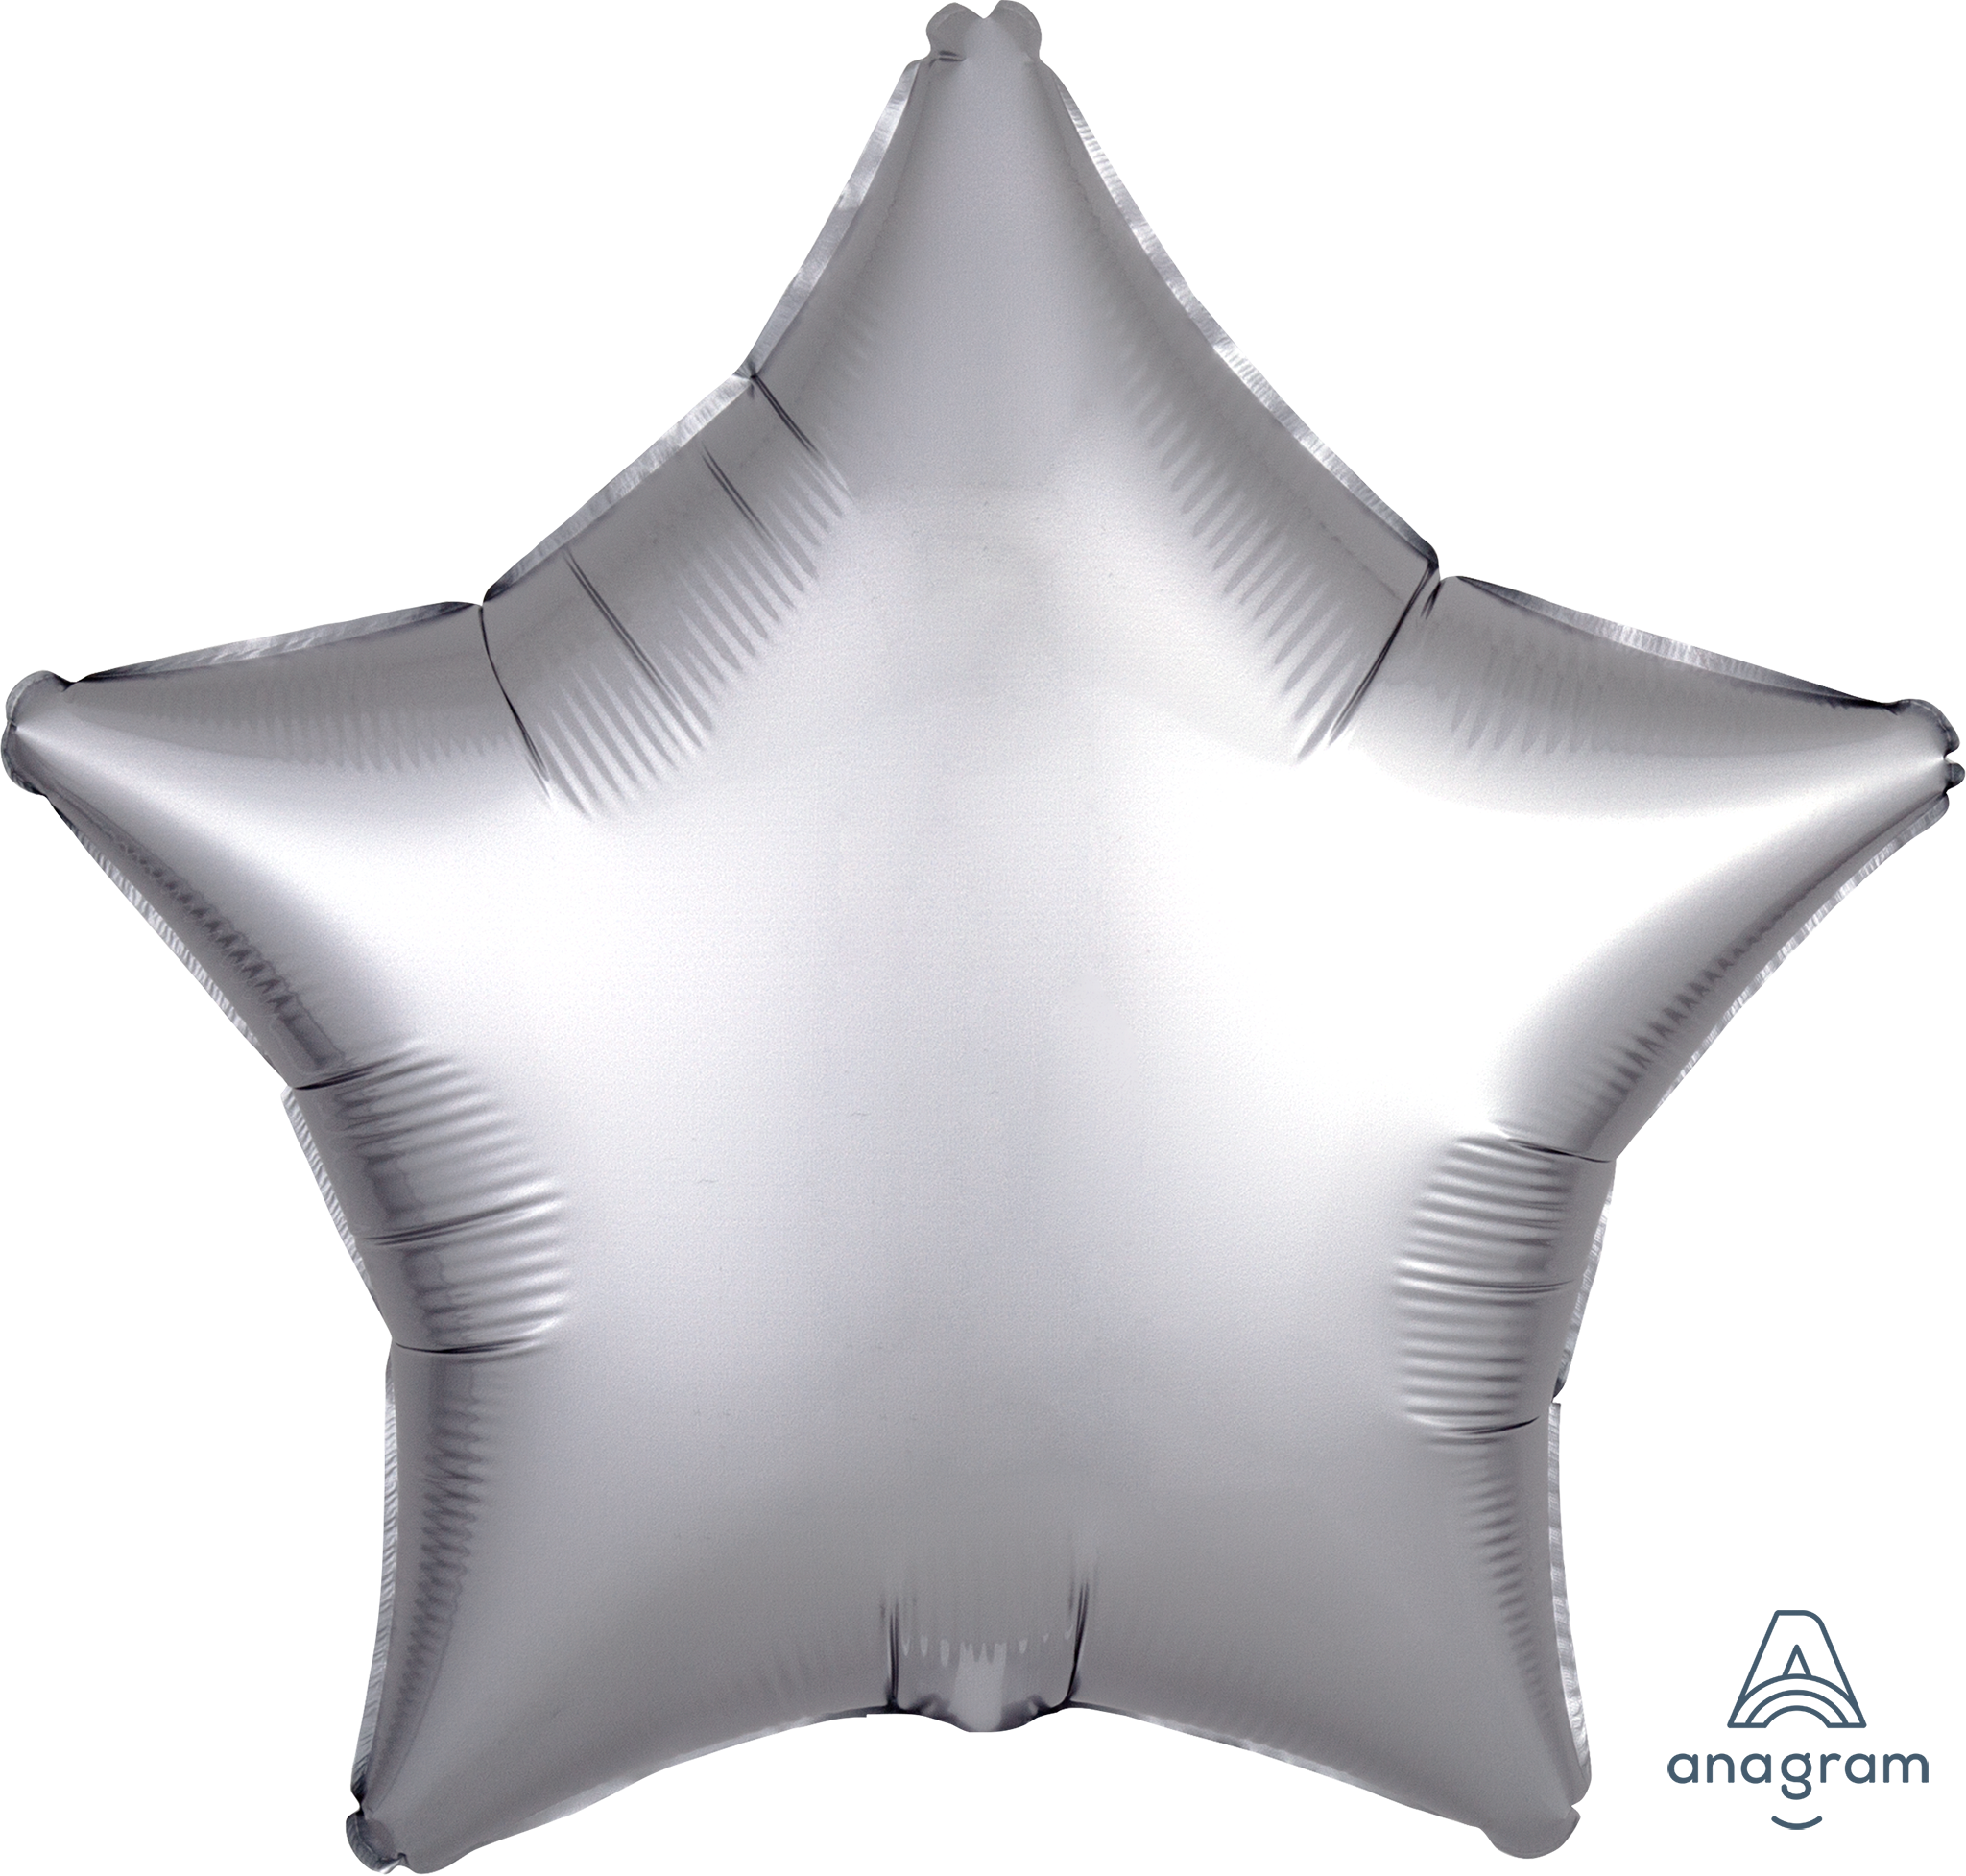 18"-solid-satin-luxe-platinum-silver-star-balloon-unicorn-party-decorations-graduation-party